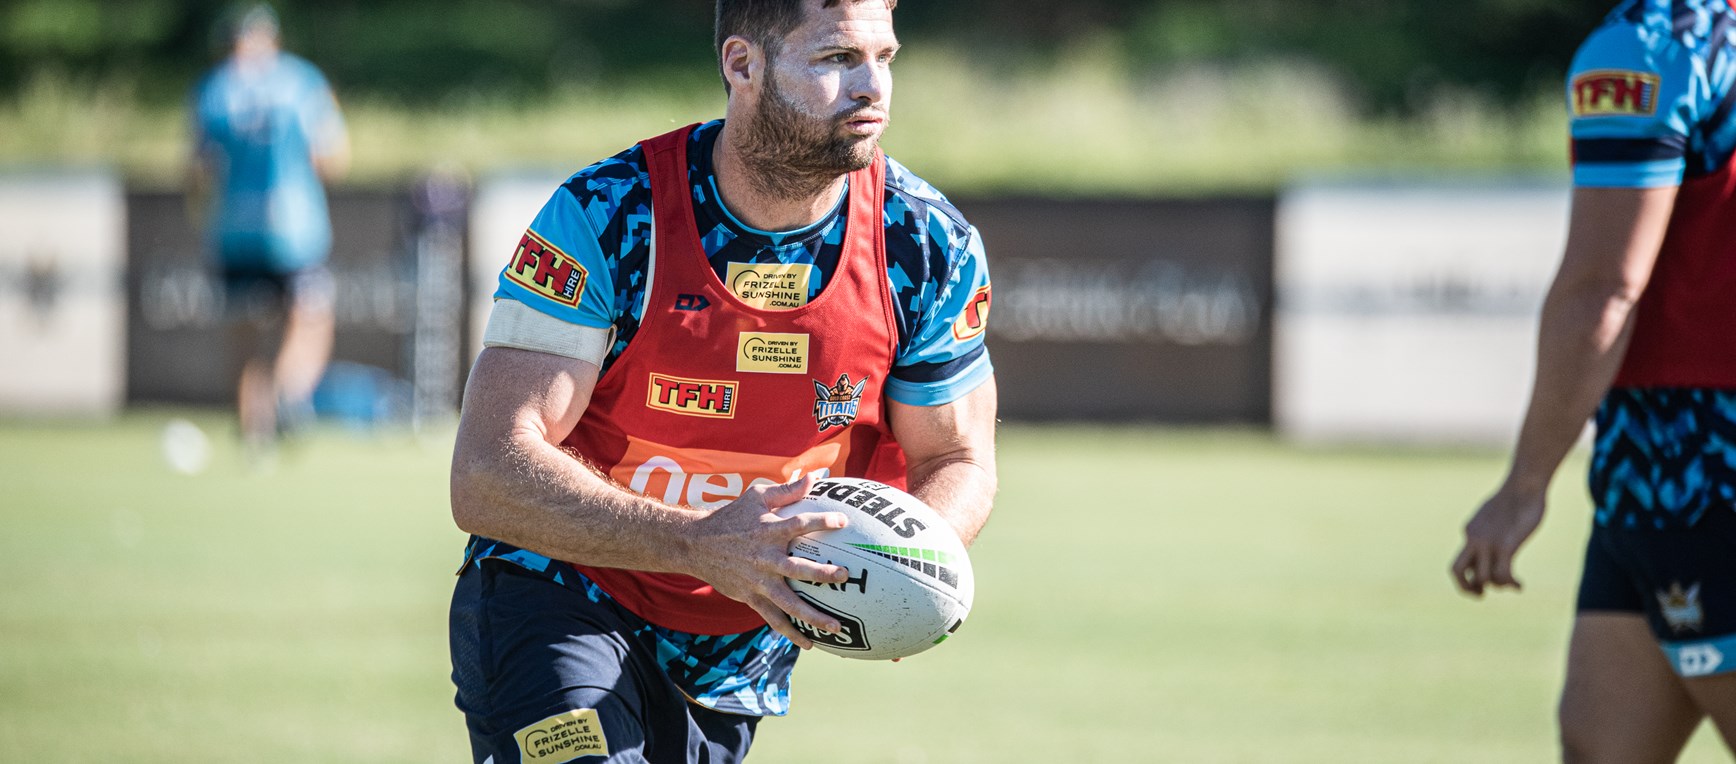 Team have final hit-out before Manly clash